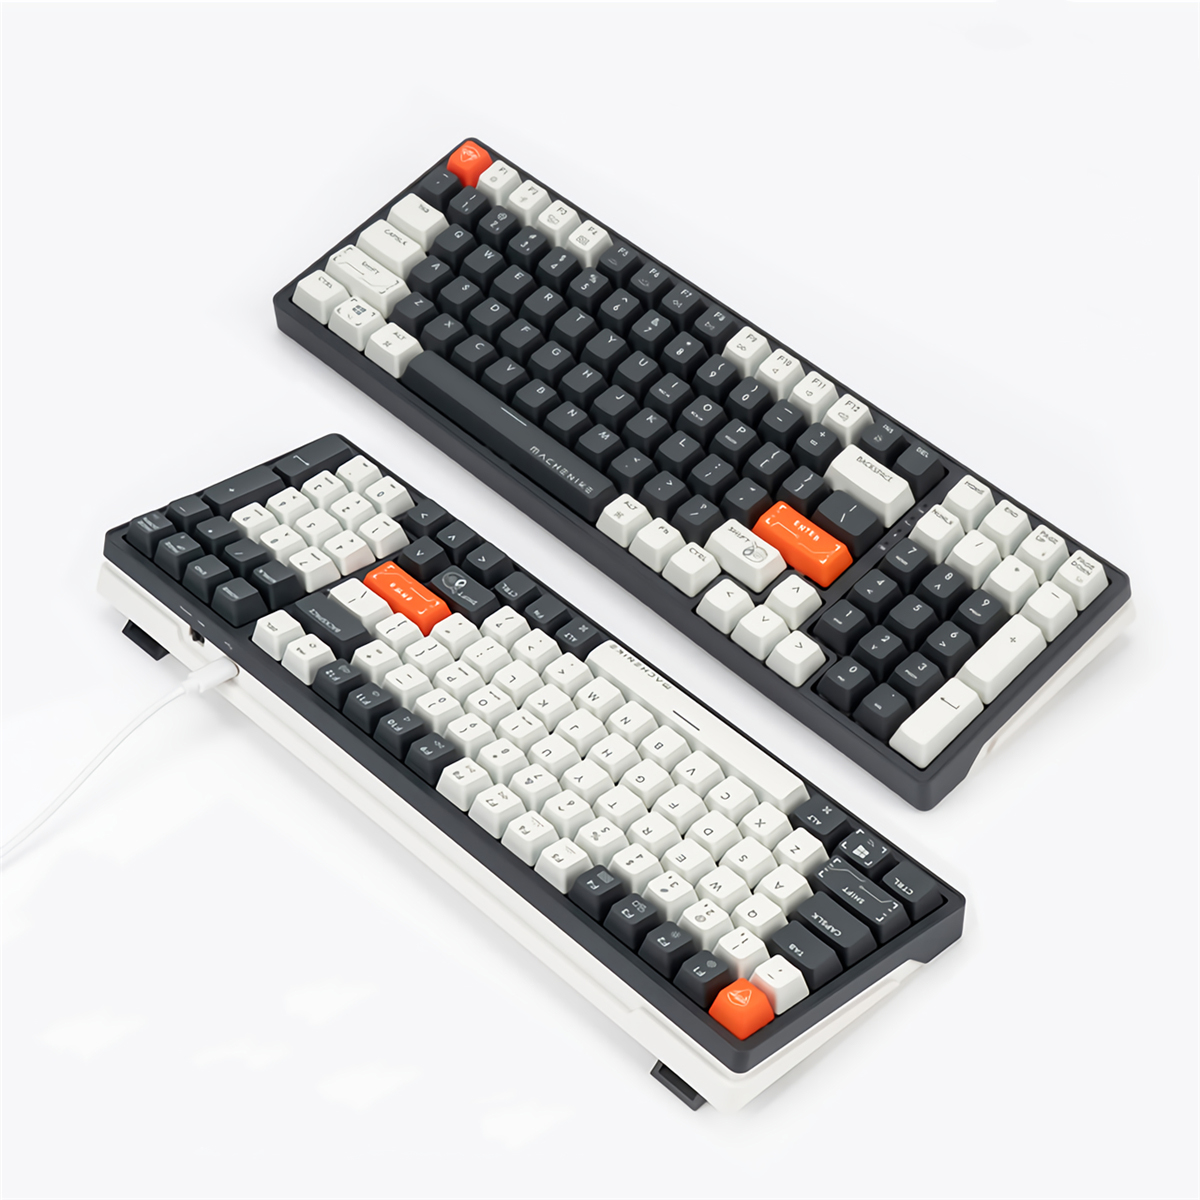 Find MACHENIKE K600 Mechanical Gaming Keyboard Dual Mode Type-C Wired bluetooth5.0 100 Keys Translucent ABS Keycaps Kailh Blue/Brown/Red Switch White LED Backlit Ergonomic Keyboard for Sale on Gipsybee.com with cryptocurrencies